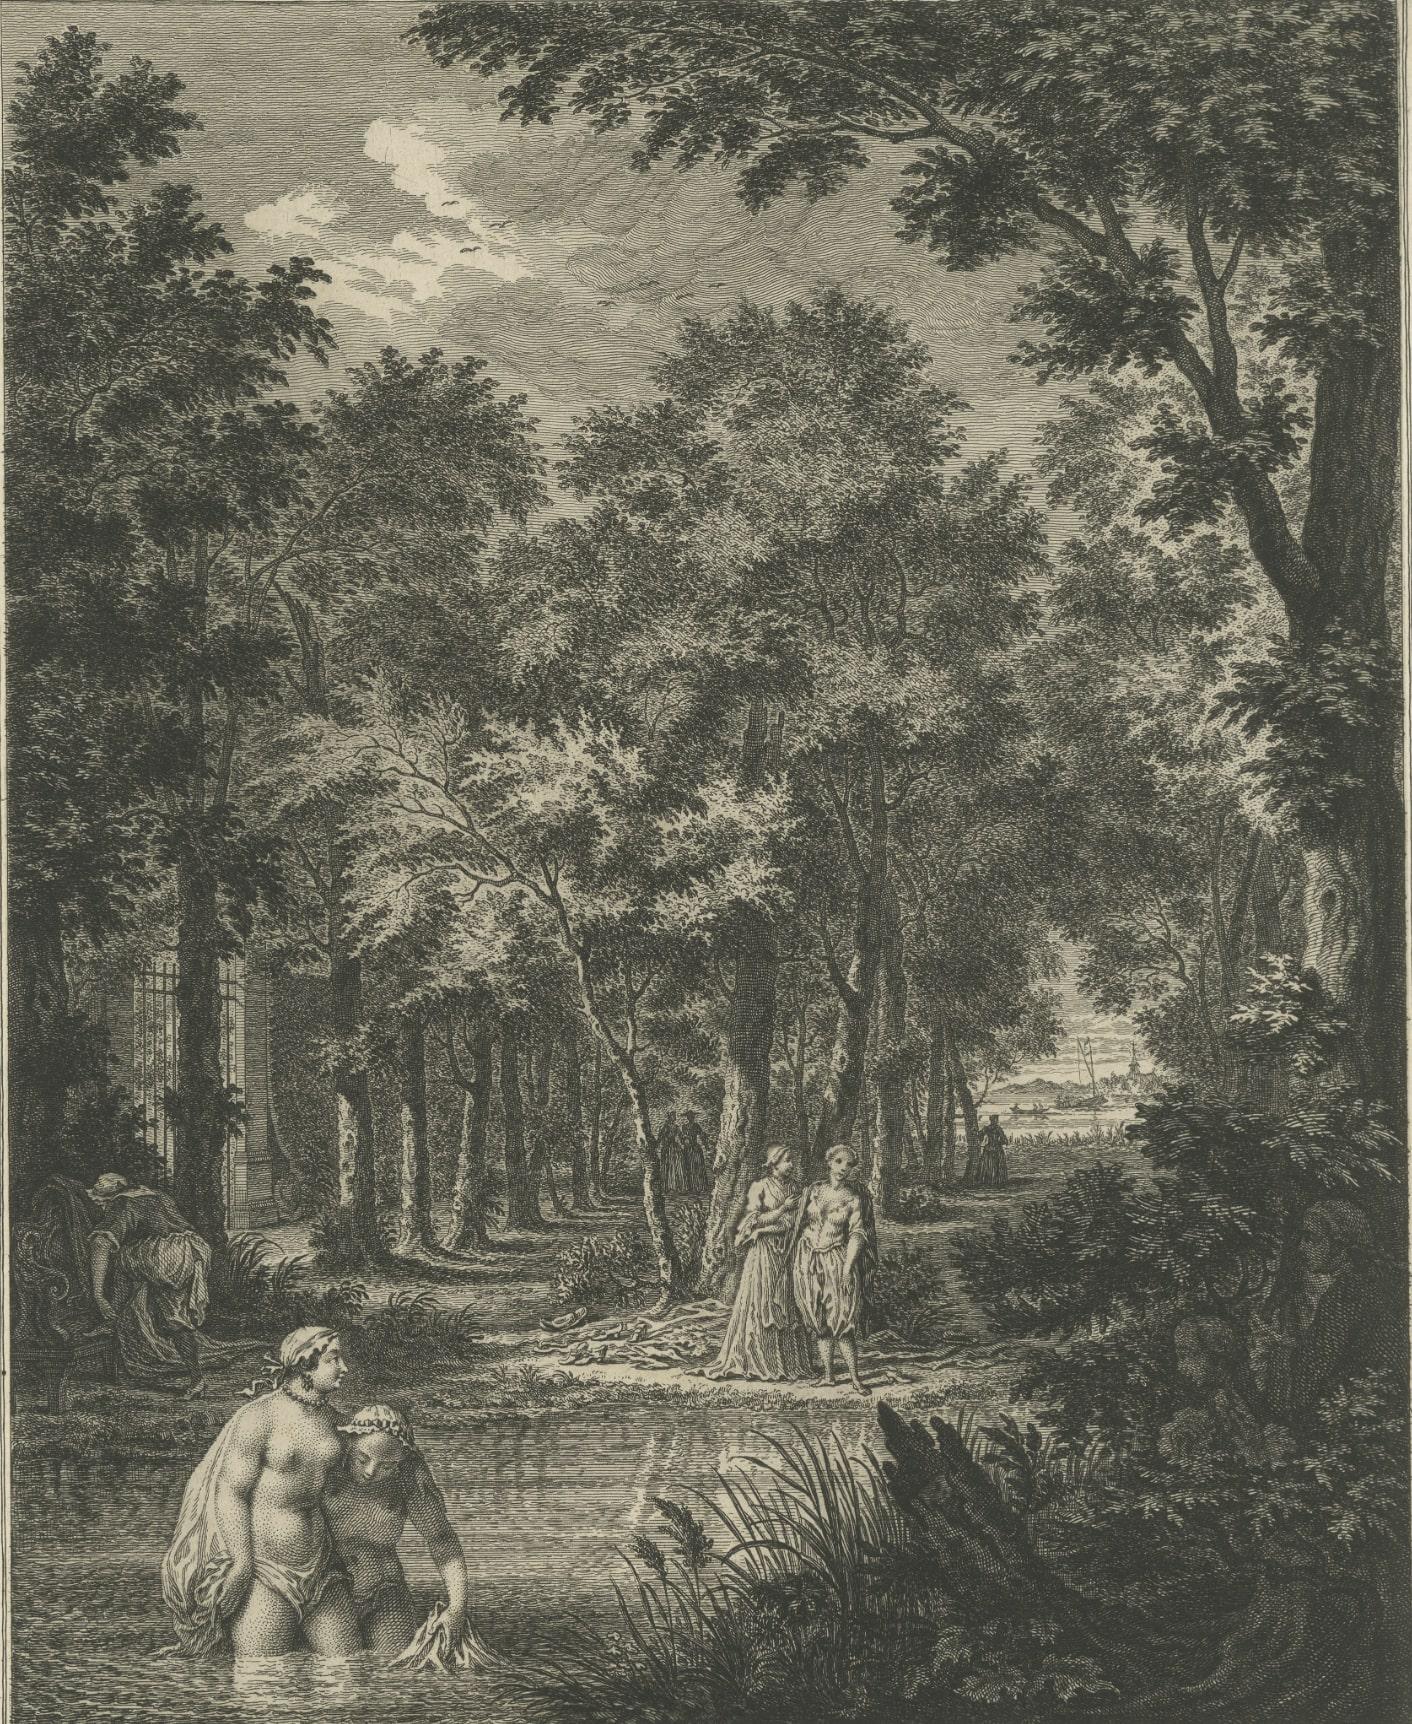 Antique print titled 'De Baadende Juffers Bespied - Les Baigneuses Epiées'. A scene in which several bathing women are spied on by two men hiding in the bushes. A plate from a series of 31 engravings published between 1754-1764 after paintings,